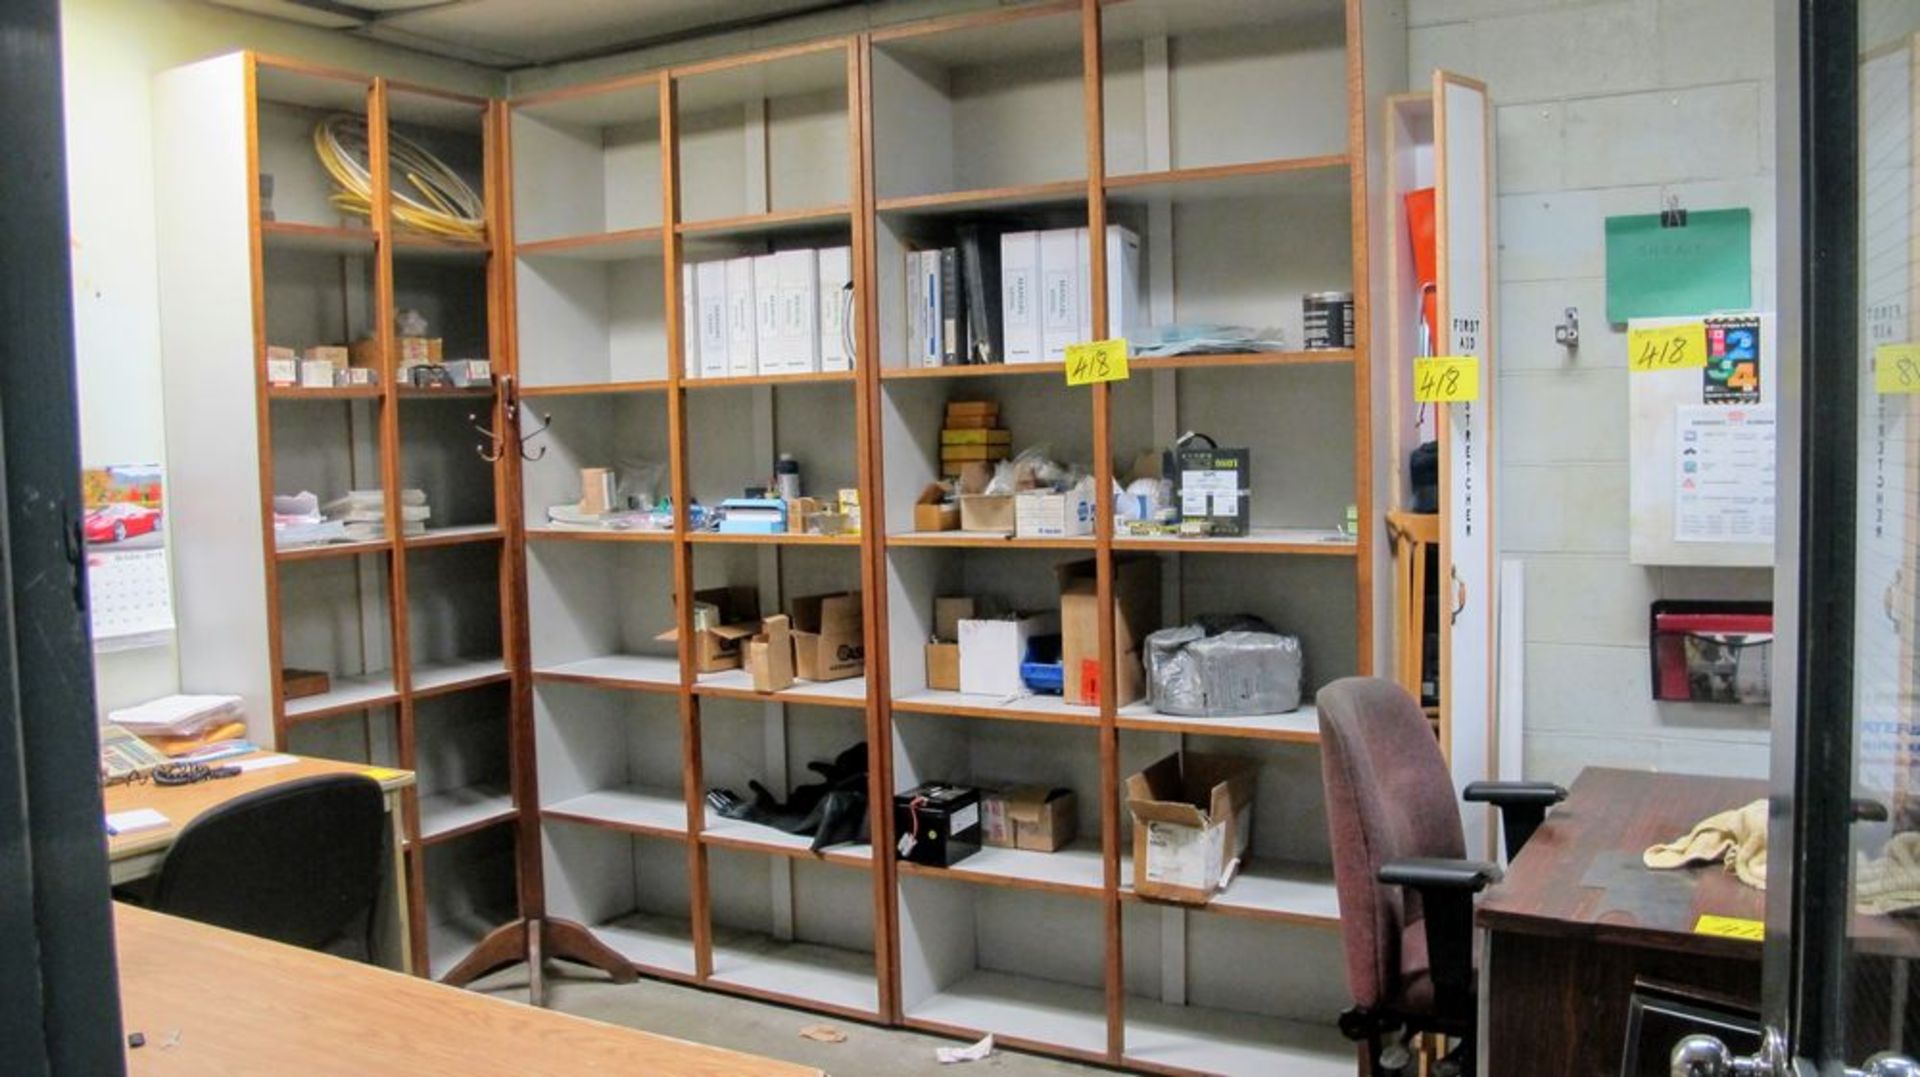 CONTENTS OF PLANT MANAGER'S OFFICE, FIRST AID SUPPLIES, FUSES, BATTERIES, MOTOR, SHELVES, DESKS,